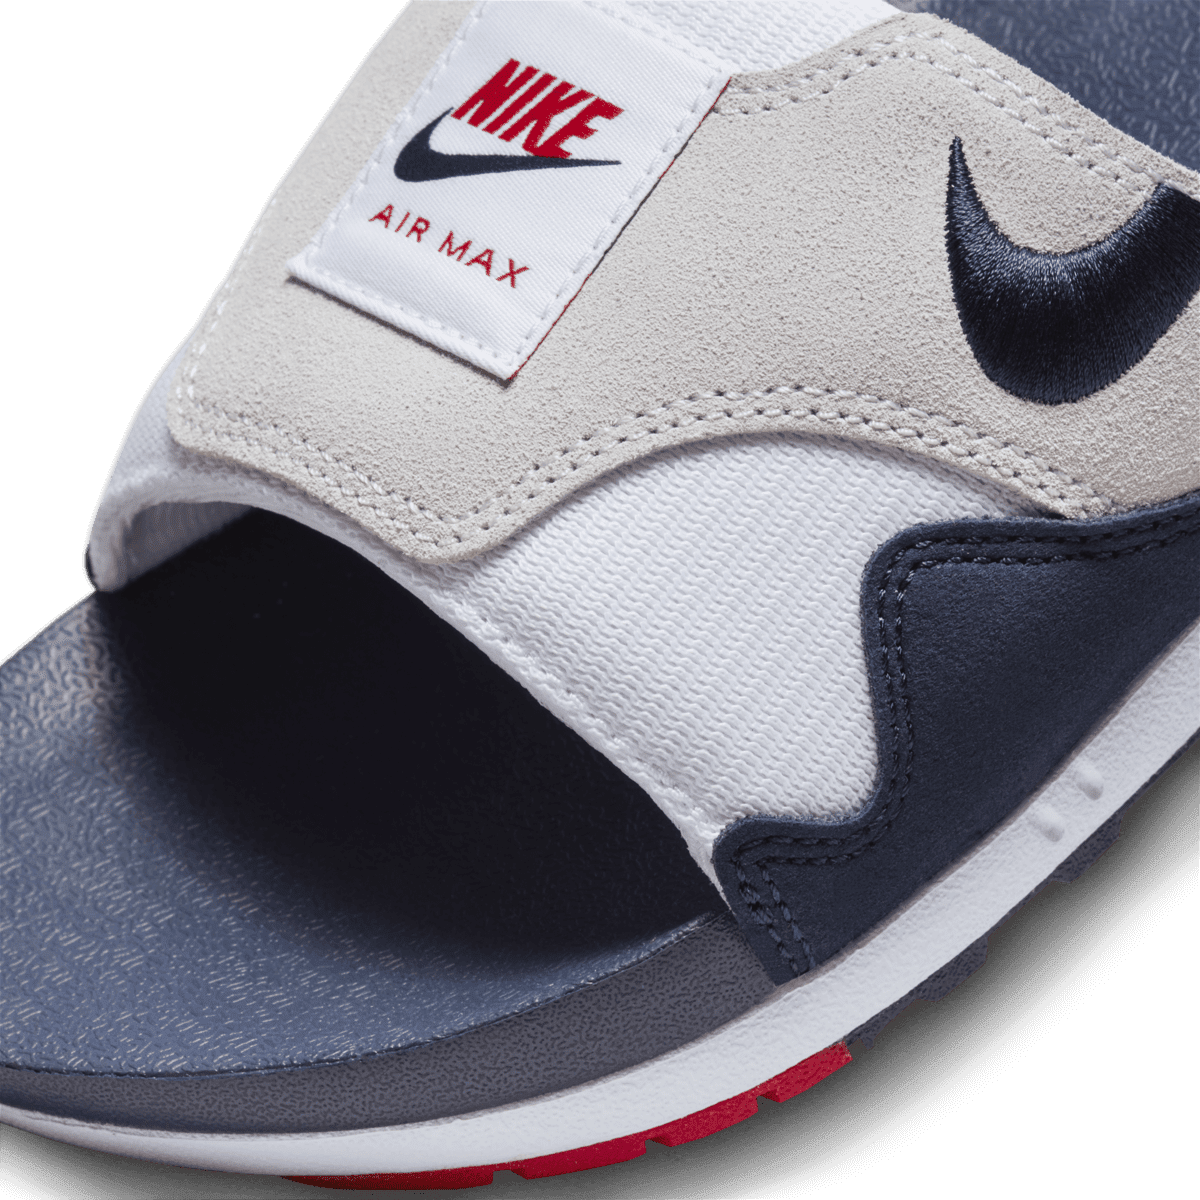 Official Images: Nike Air Max 1 Slide 